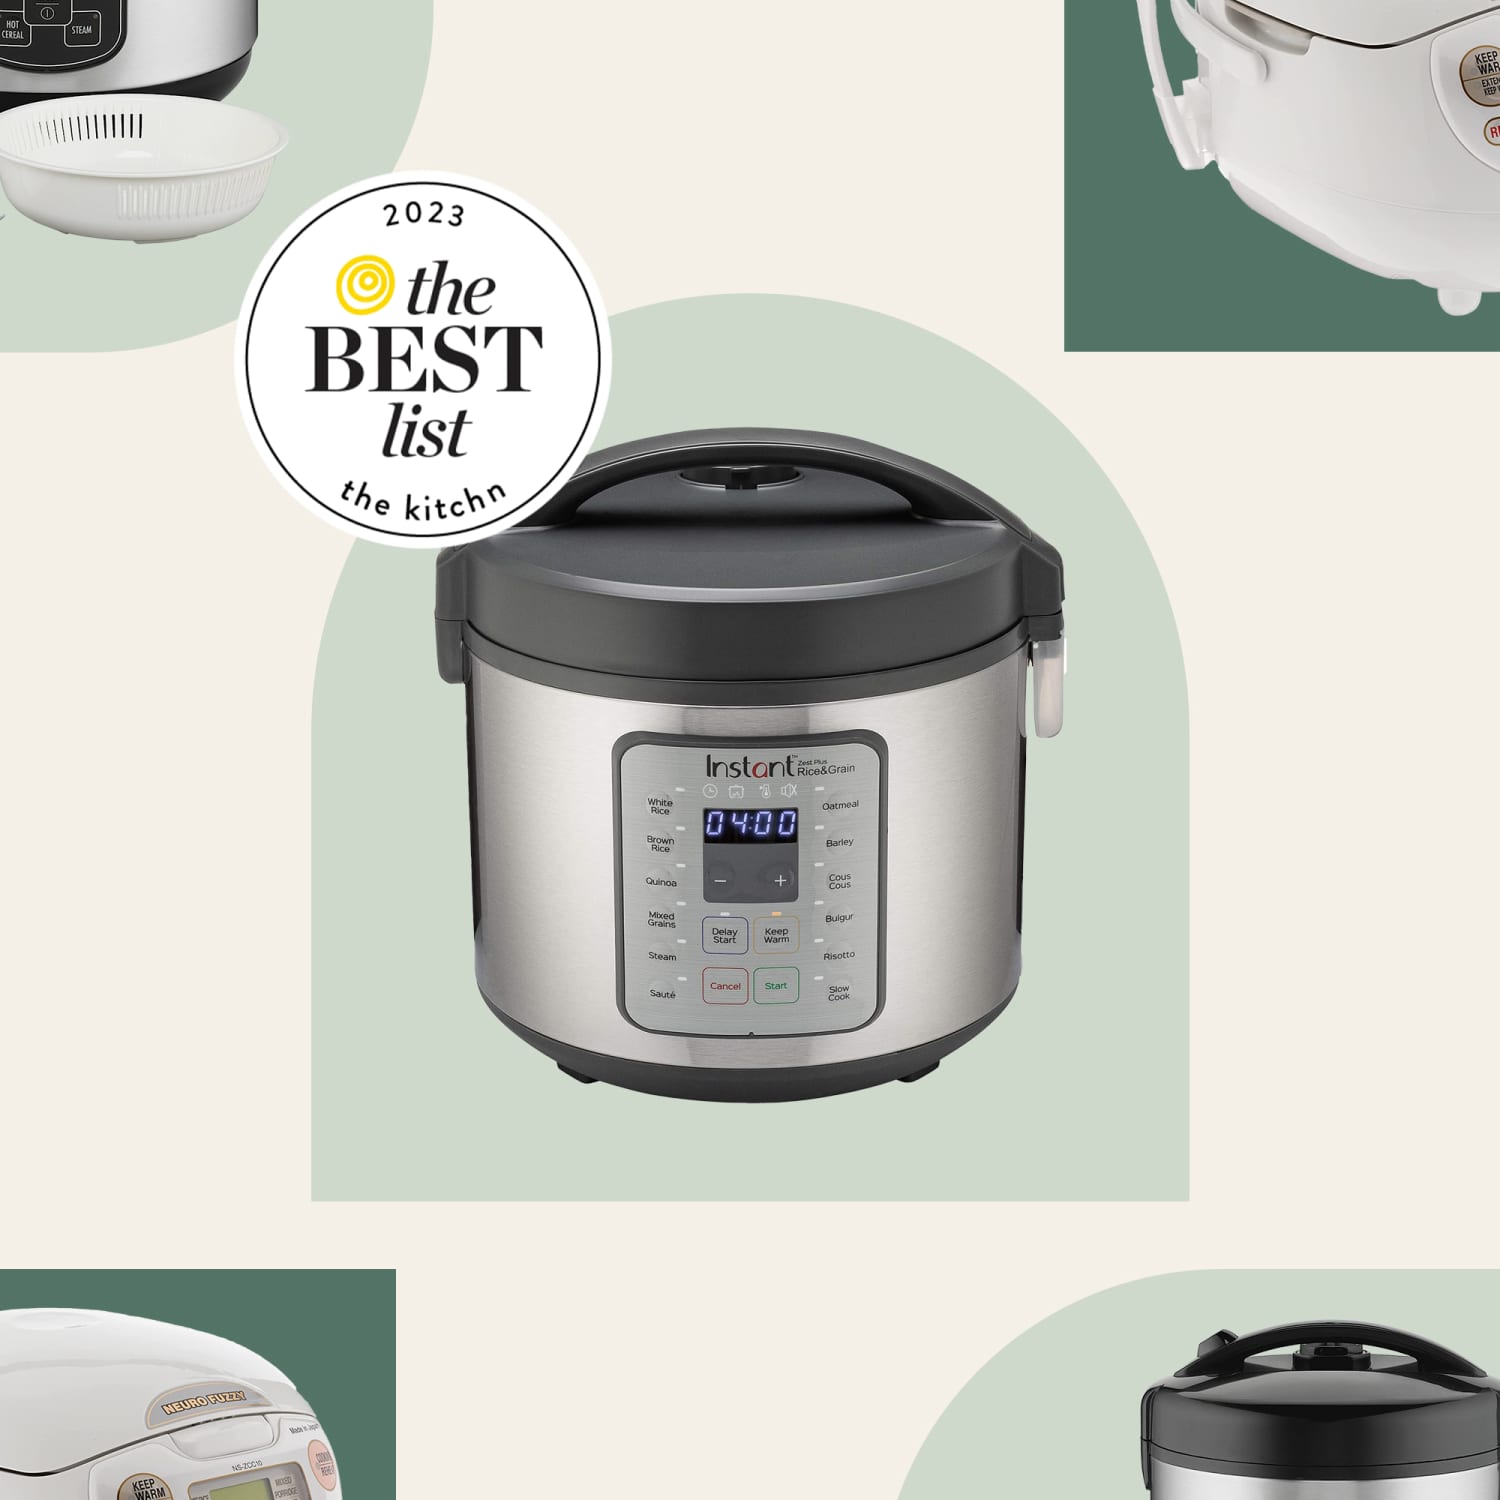 https://cdn.apartmenttherapy.info/image/upload/f_jpg,q_auto:eco,c_fill,g_auto,w_1500,ar_1:1/k%2Fbest-list-rice-cookers-2023-lead